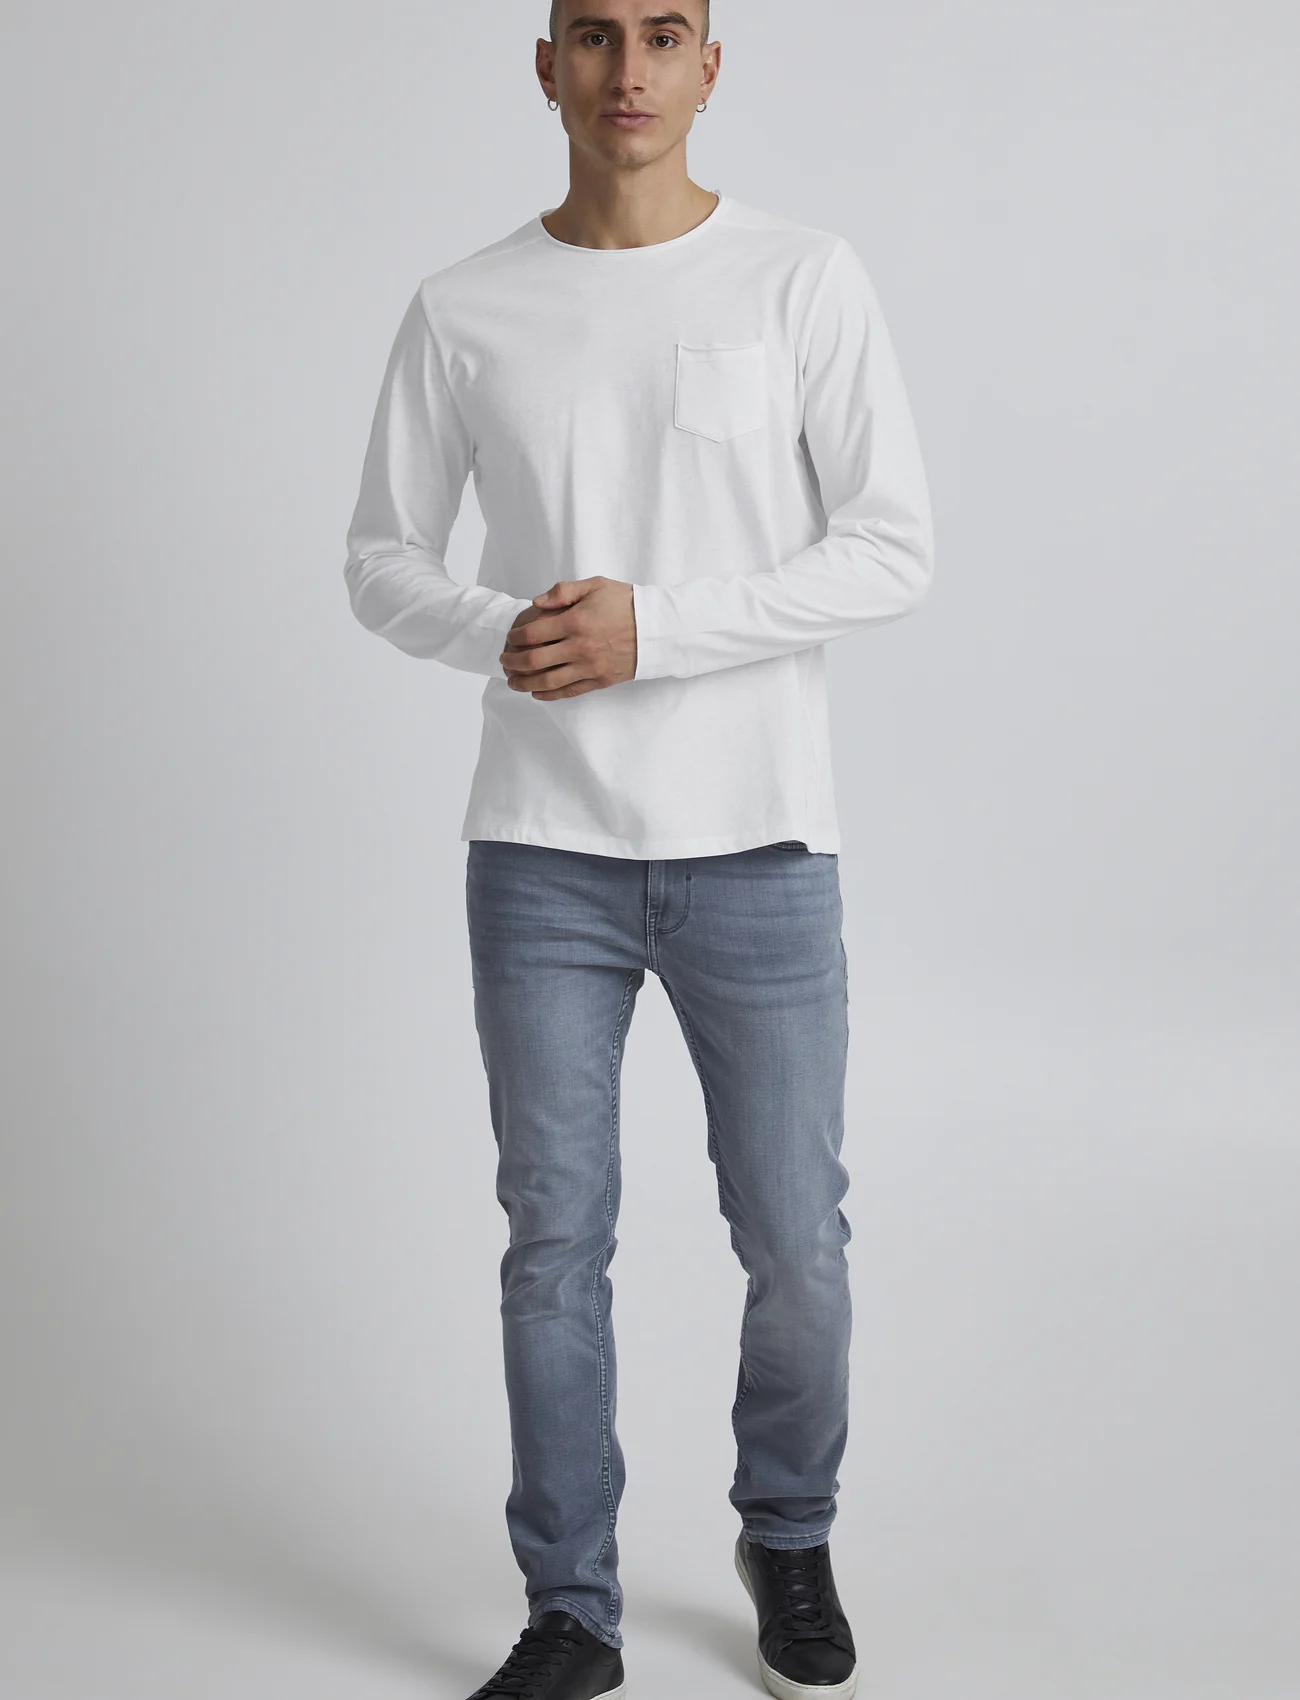 Blend - BHNICOLAI tee l.s. - long-sleeved t-shirts - white - 0